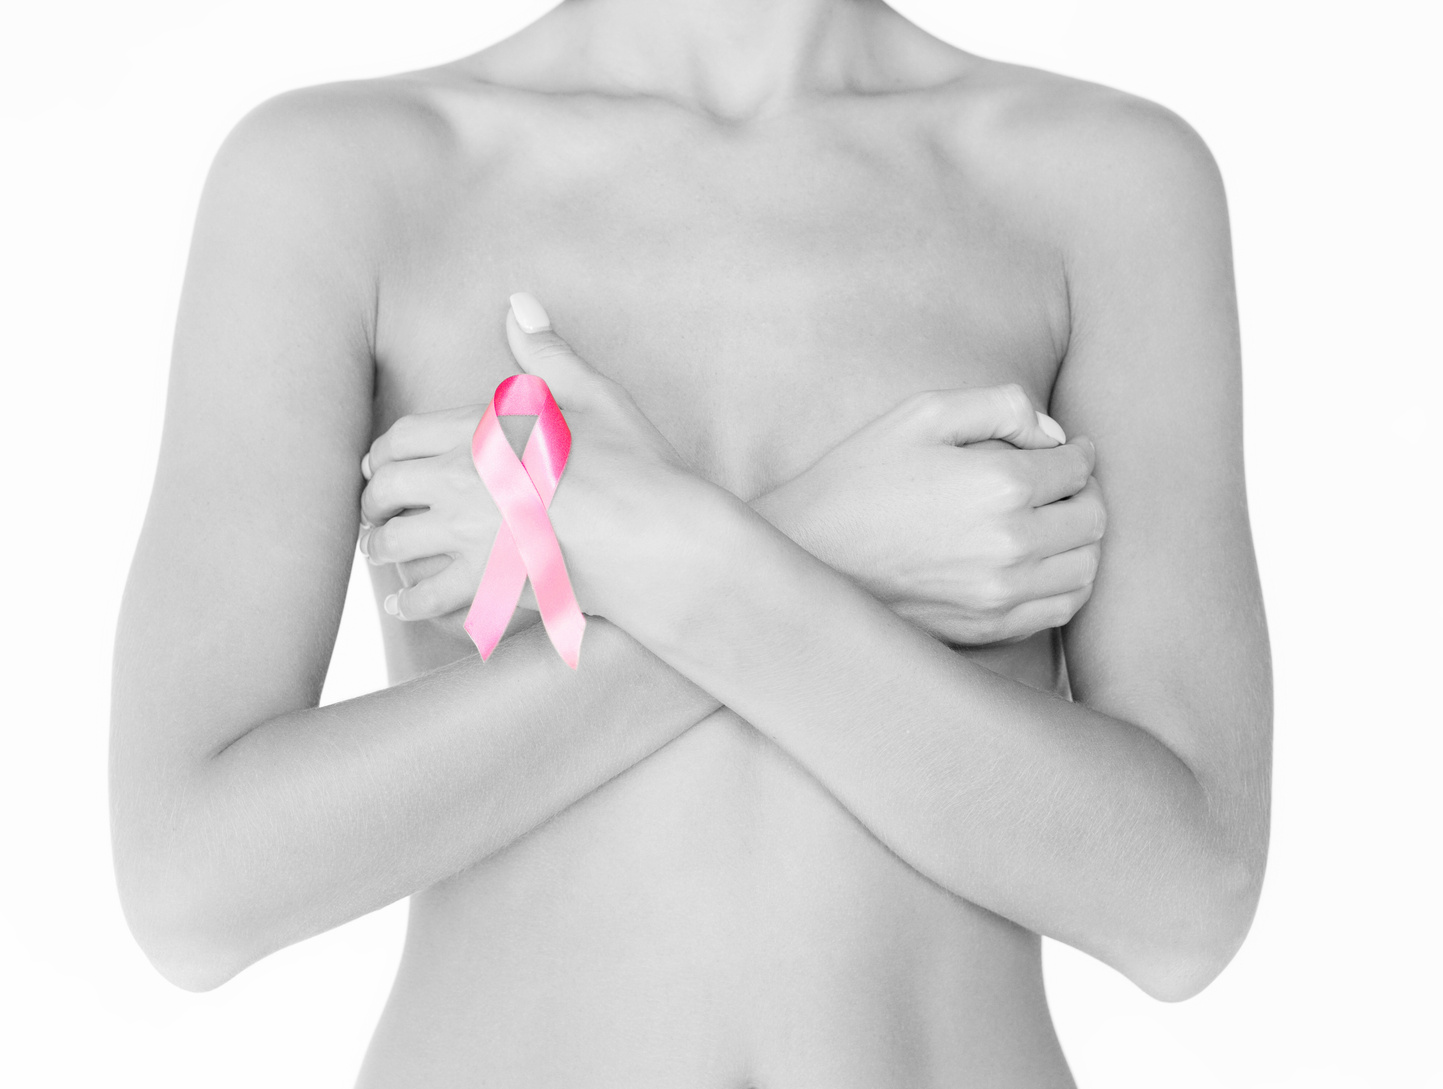 Naked Woman with Breast Cancer Awareness Ribbon